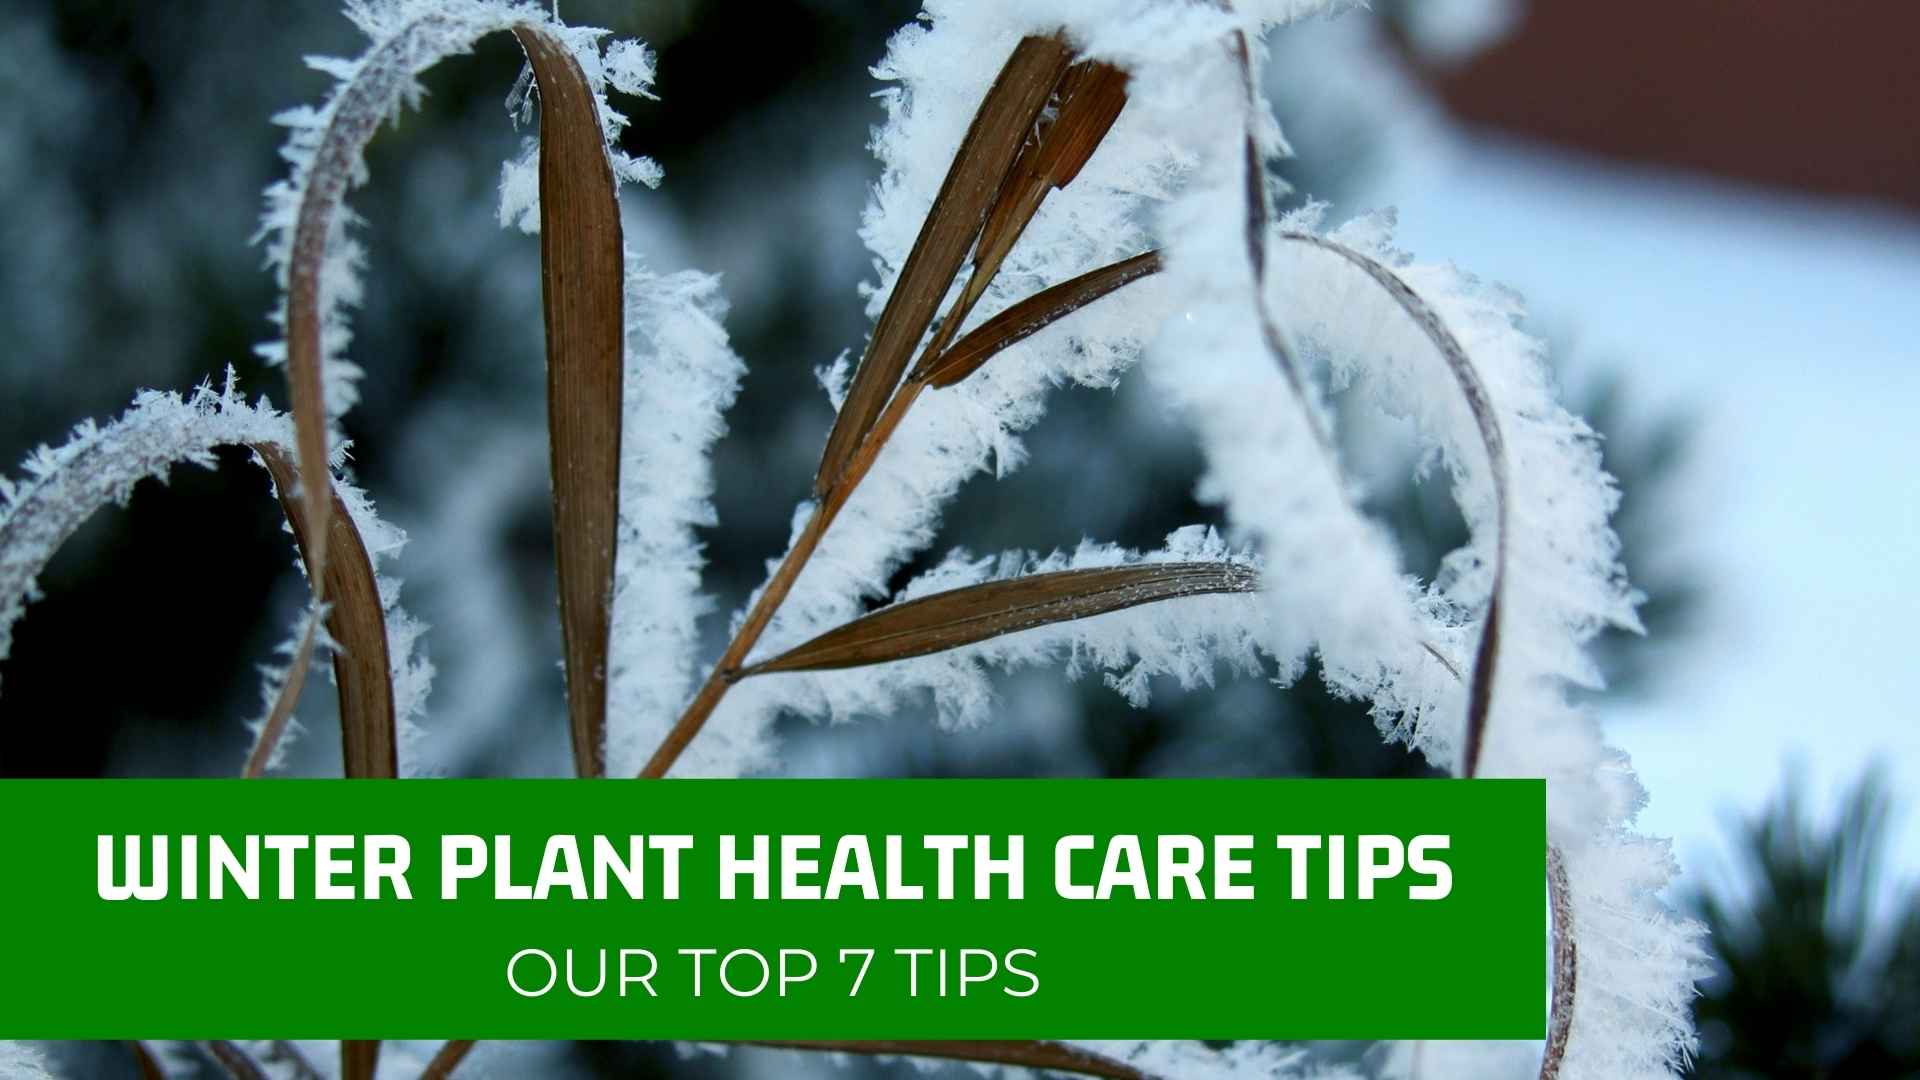 Top 7 Winter Plant Health Care Tips